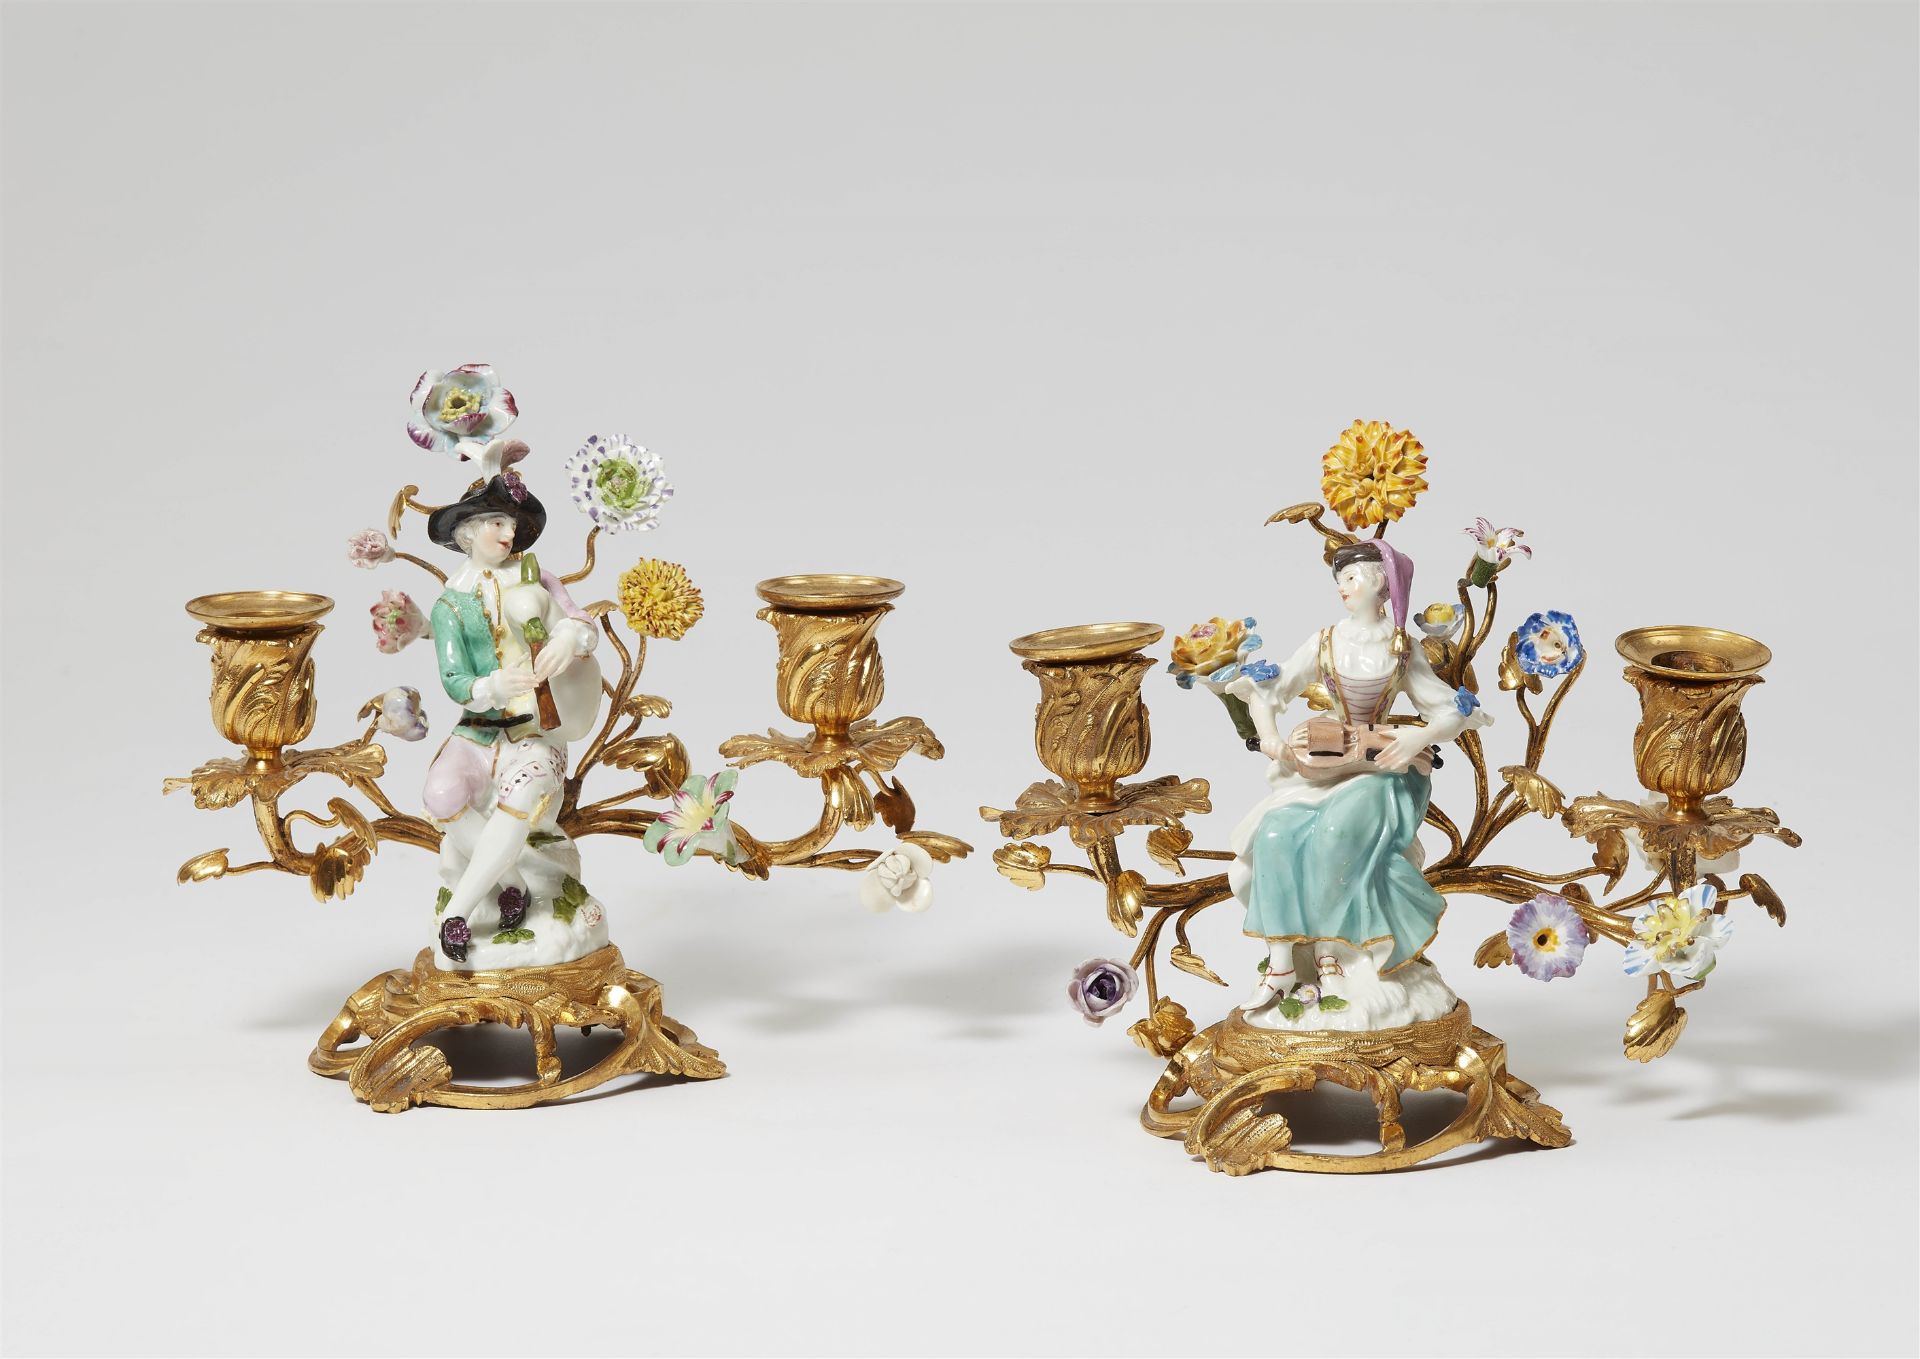 A pair of candlesticks with Meissen porcelain figures